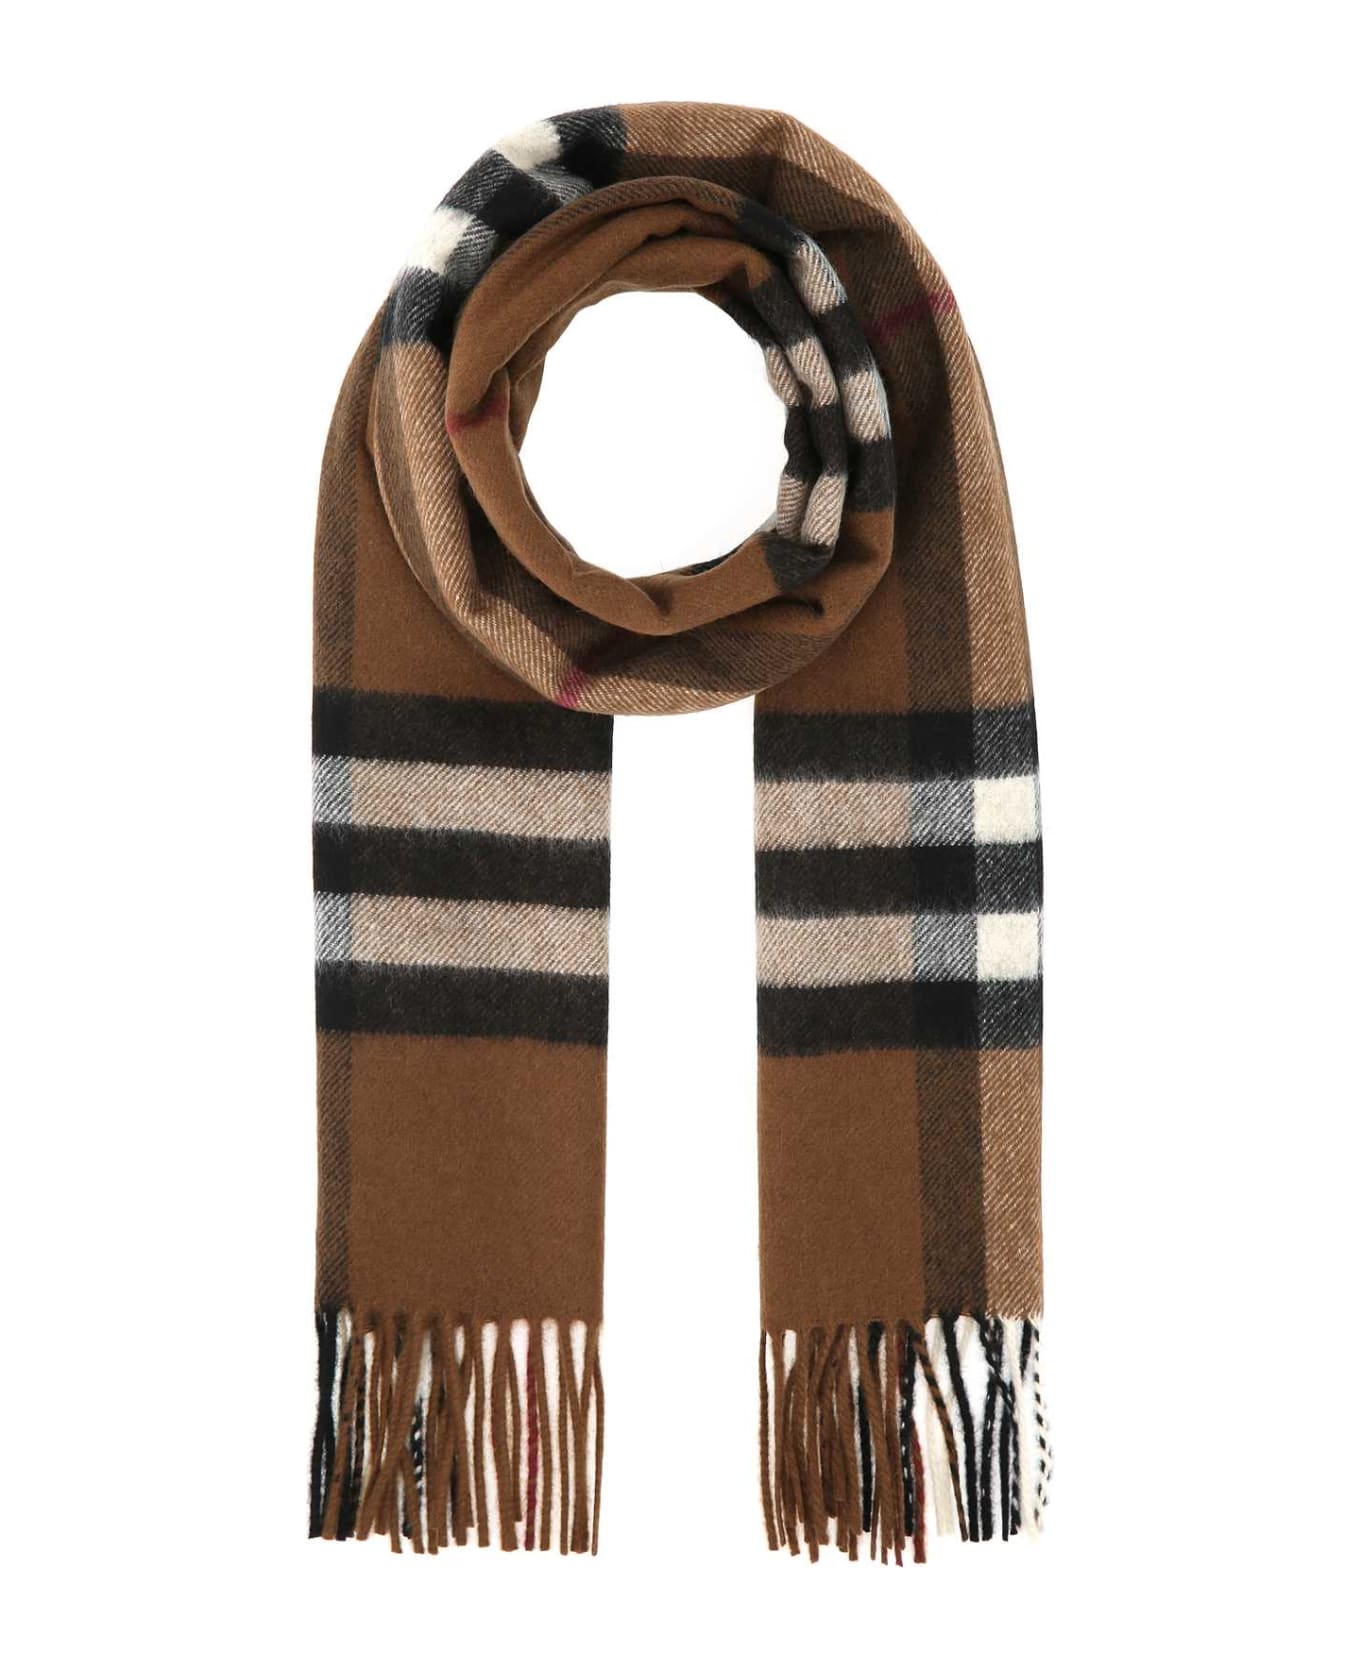 Burberry Embroidered Cashmere Scarf - A8773 スカーフ